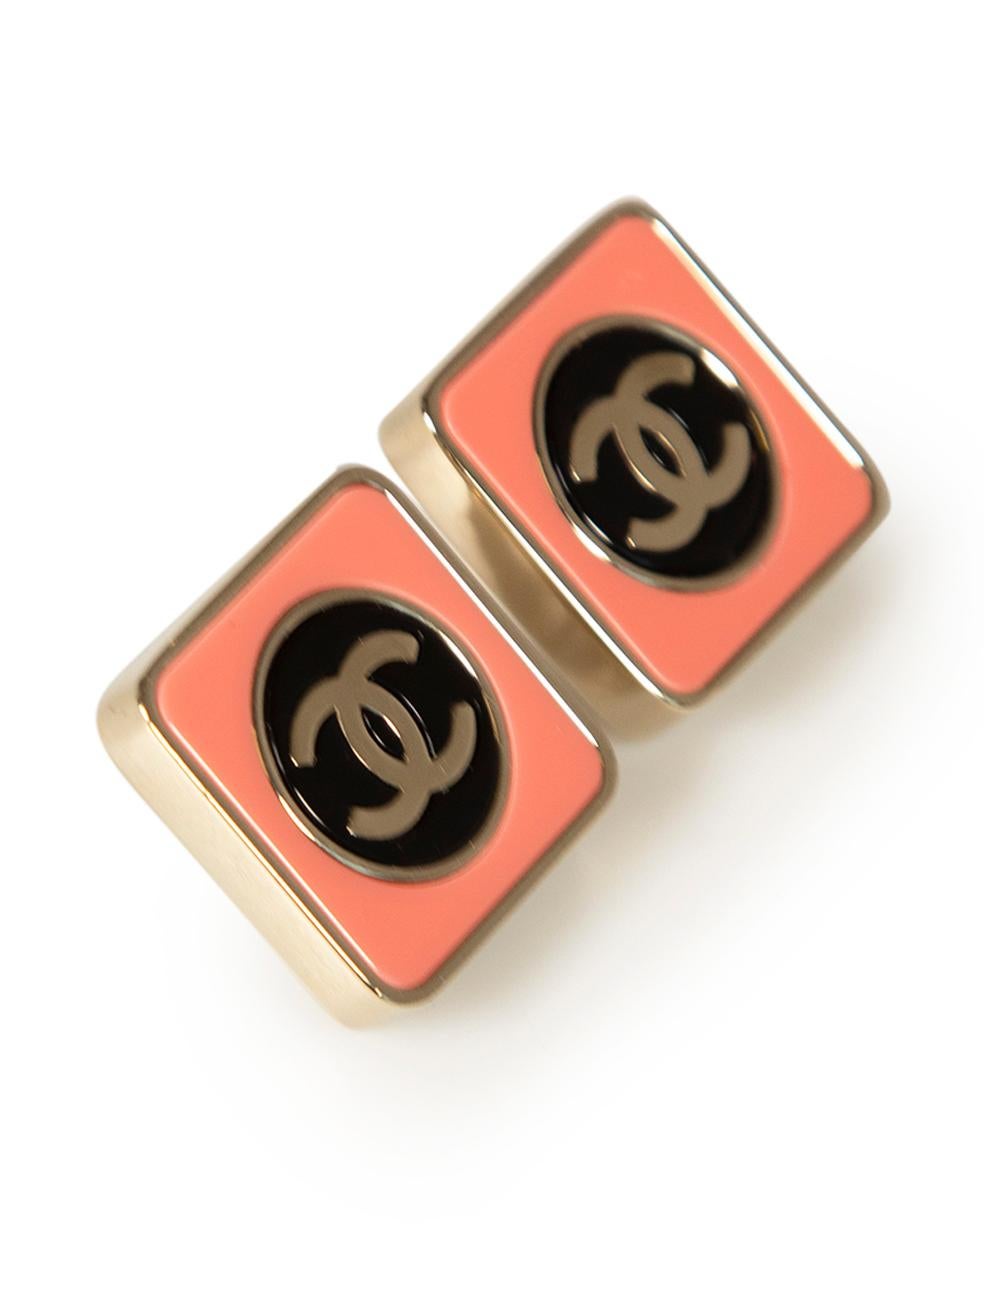 CONDITION is Very good. Hardly any visible wear to earrings is evident on this used Chanel designer resale item.
  
Details
2023
Pink
Gold tone metal
Square earrings
Interlocking CC logo
  
Made in Italy

Composition
Metal
  
Size & Fit
Product